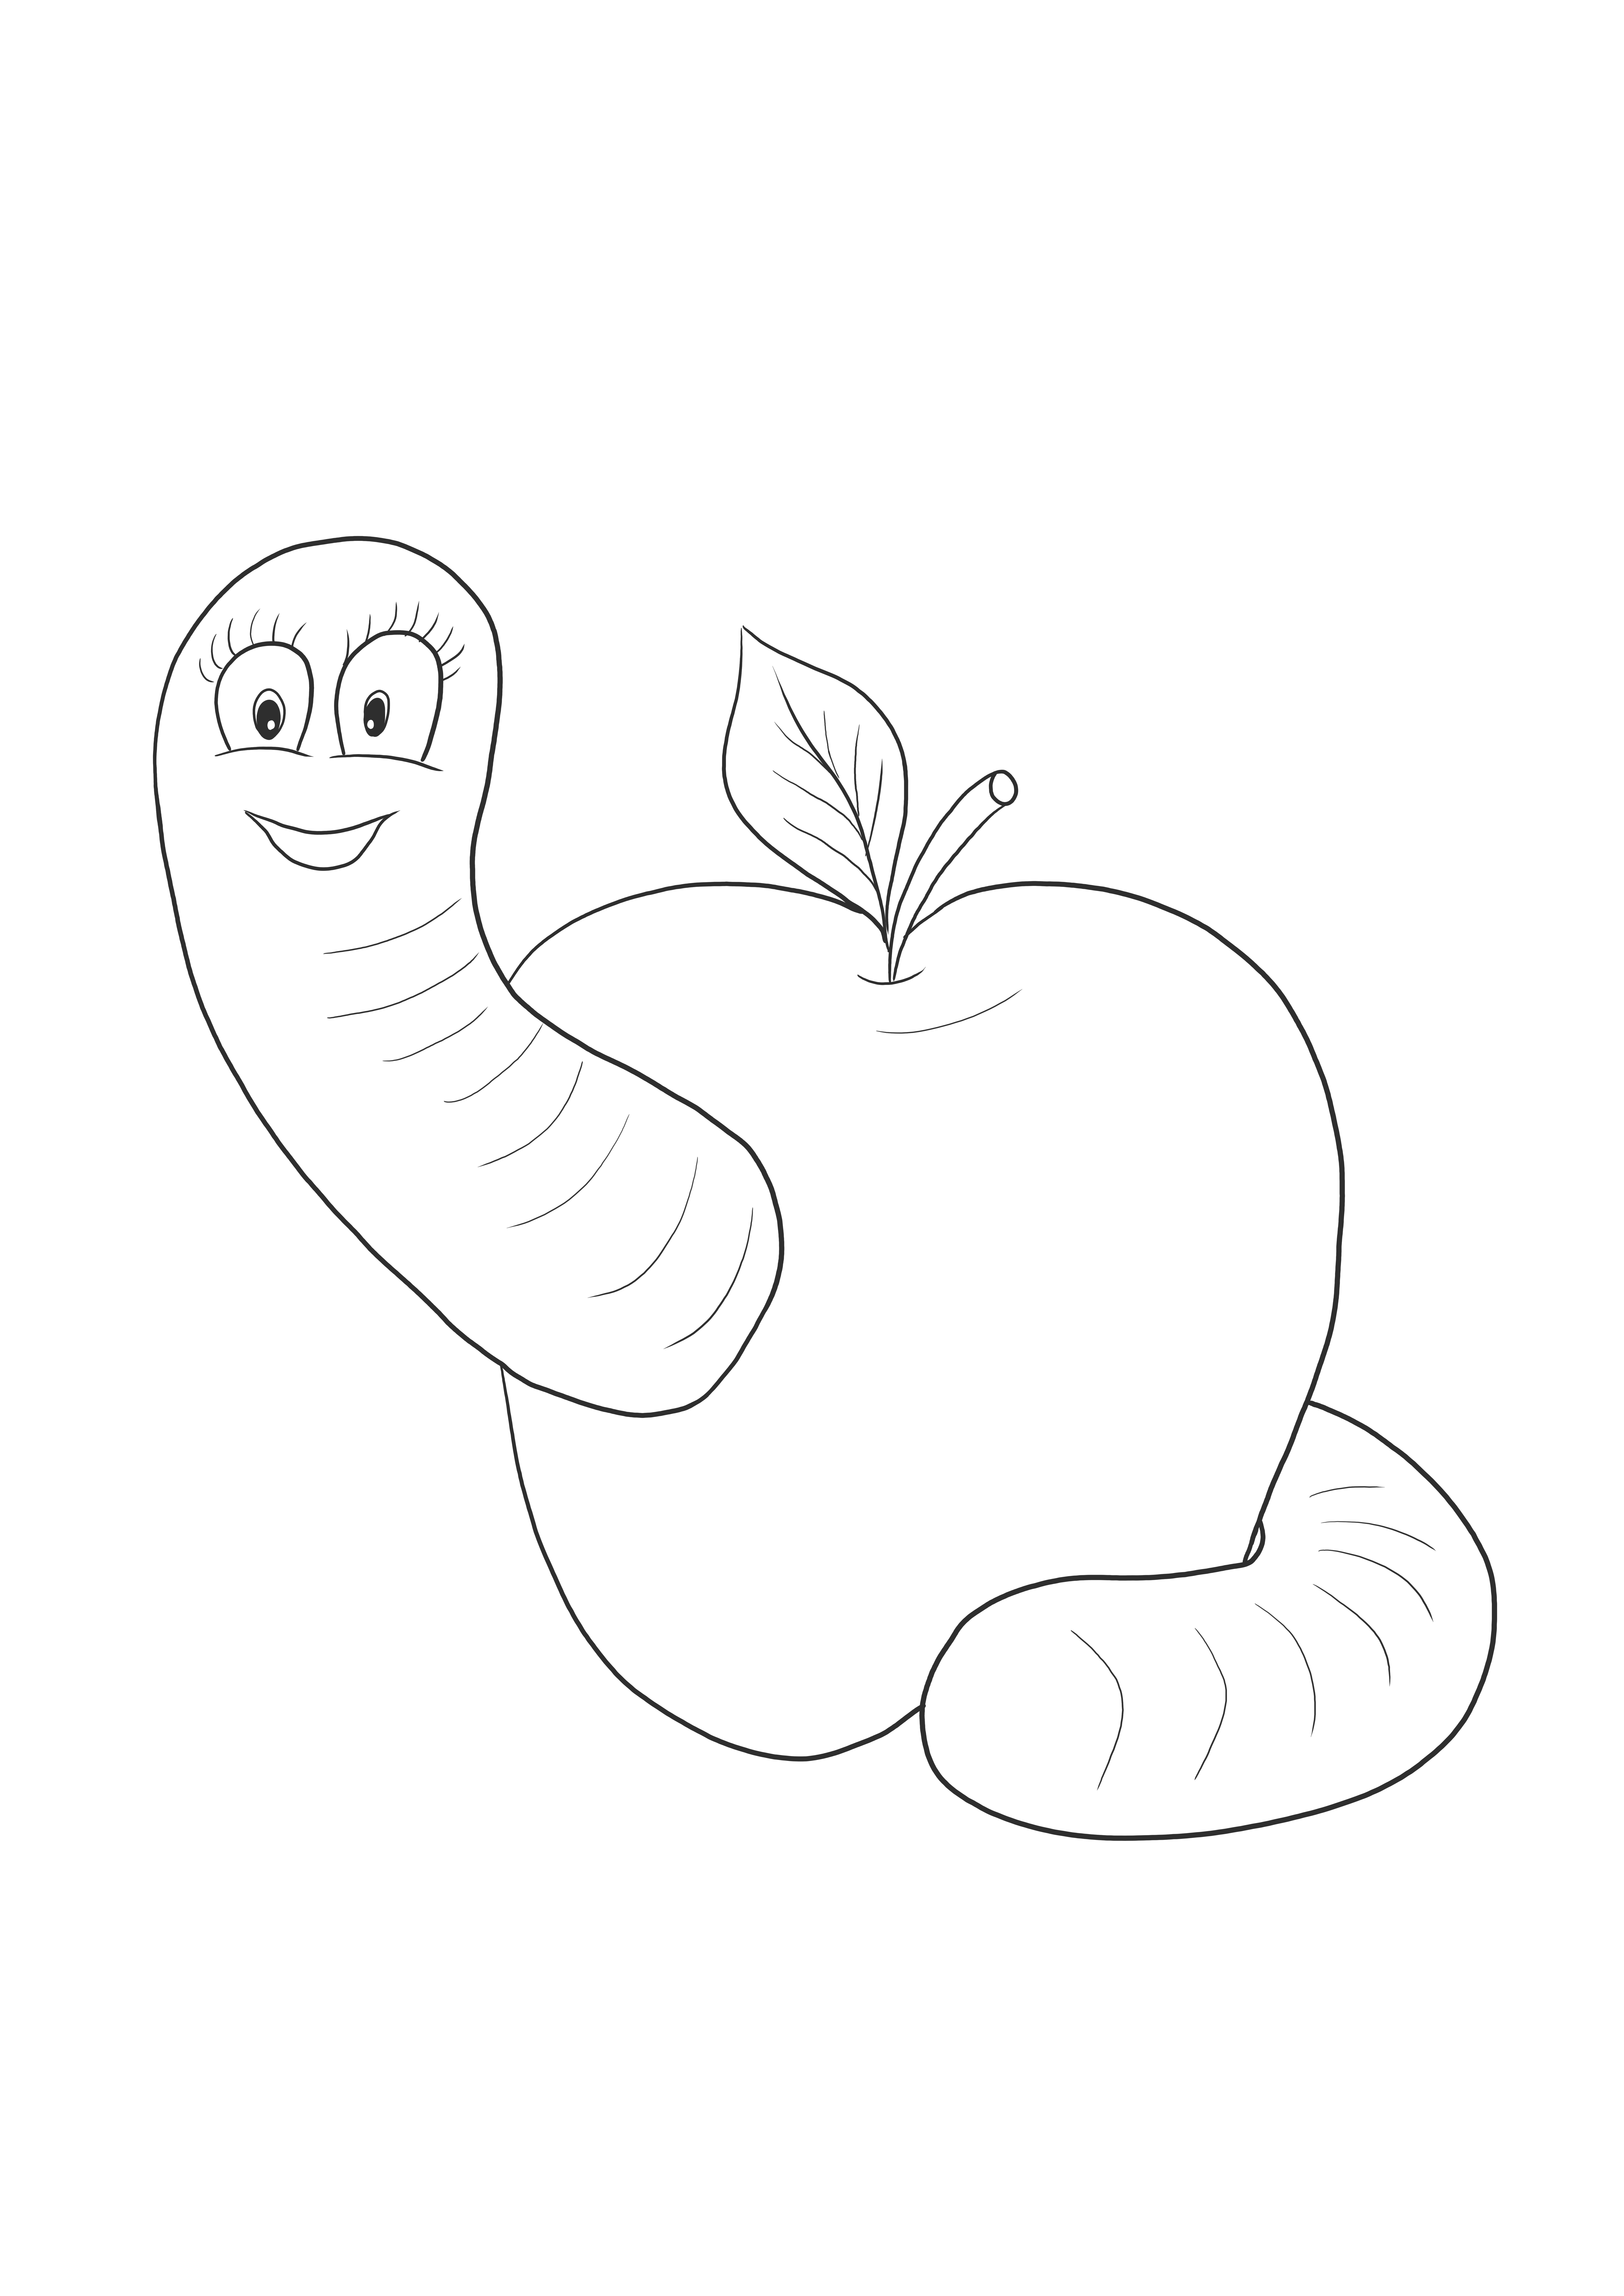 Super cute Apple worm printable to color and download for free